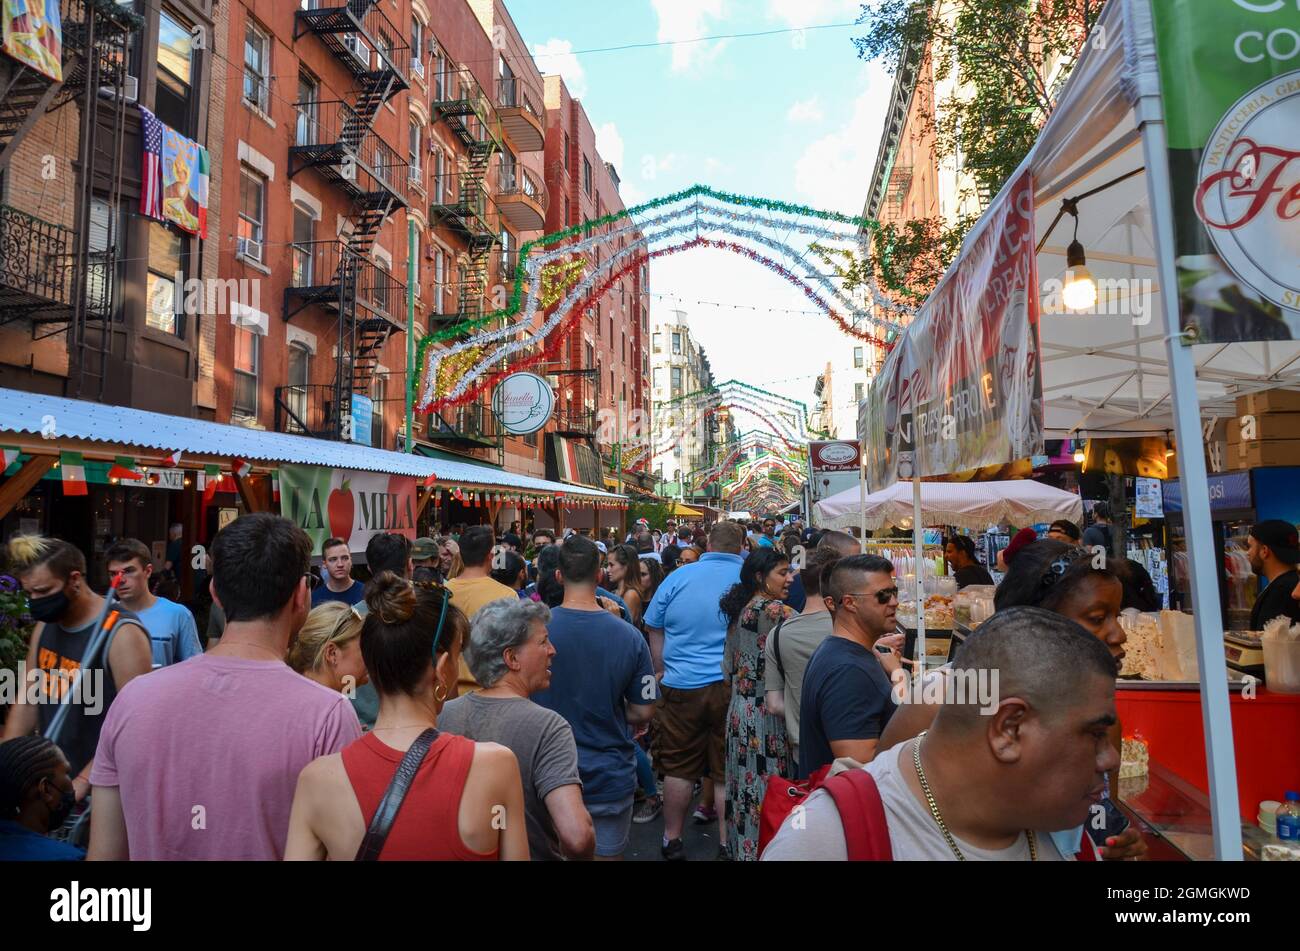 The annual San Gennaro returned to Little Italy in New York City to celebrate Italian culture and heritage in the city on September 18, 2021. Stock Photo